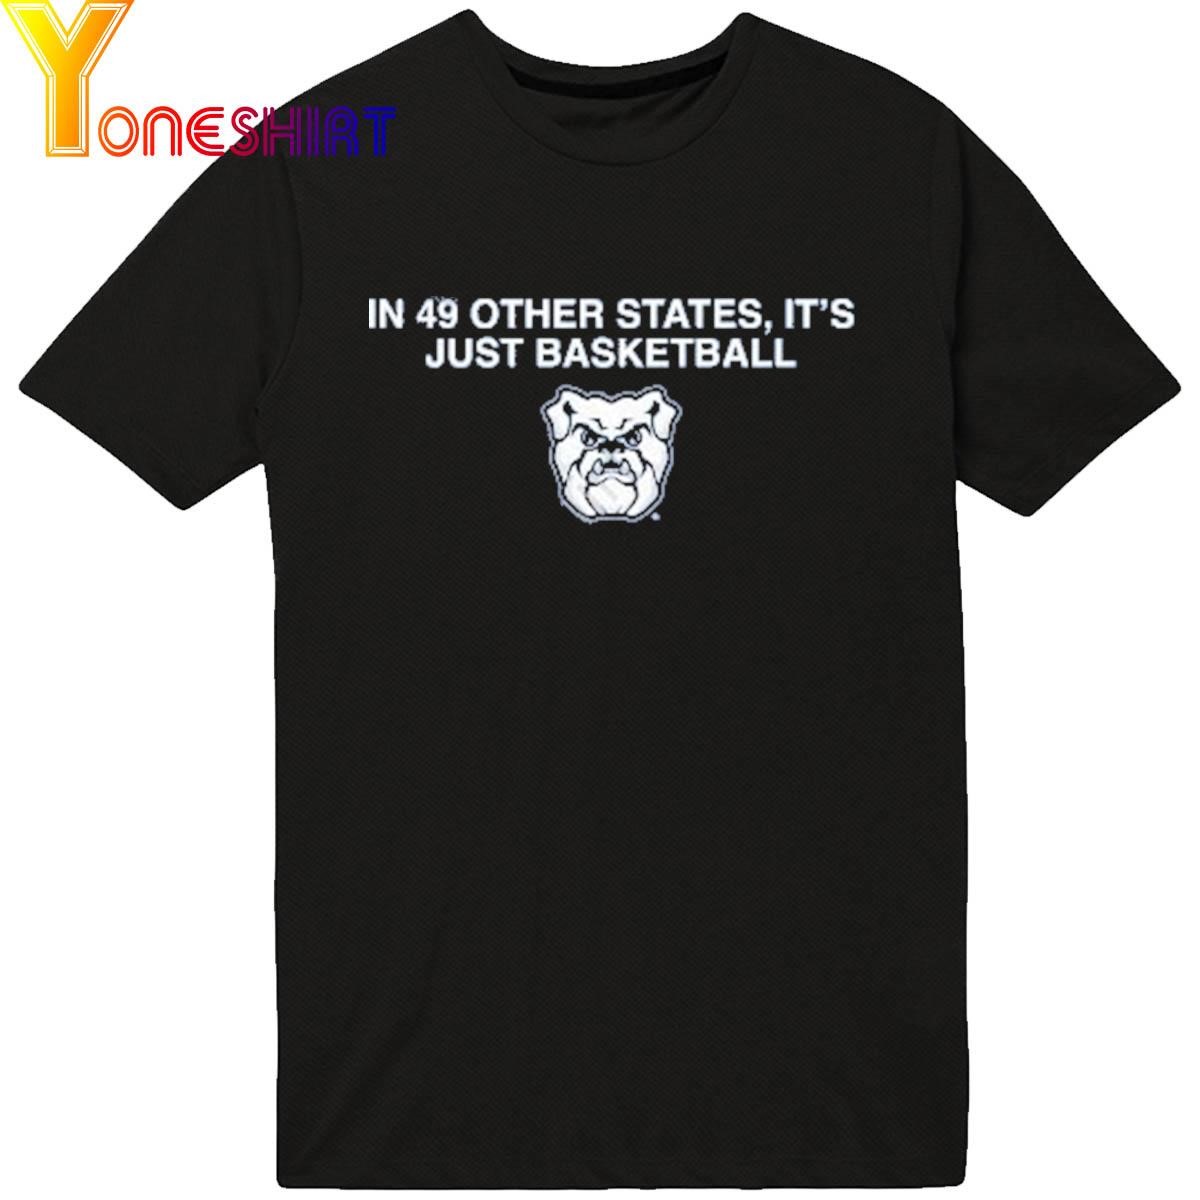 In 49 Other States It's Just Basketball Shirt